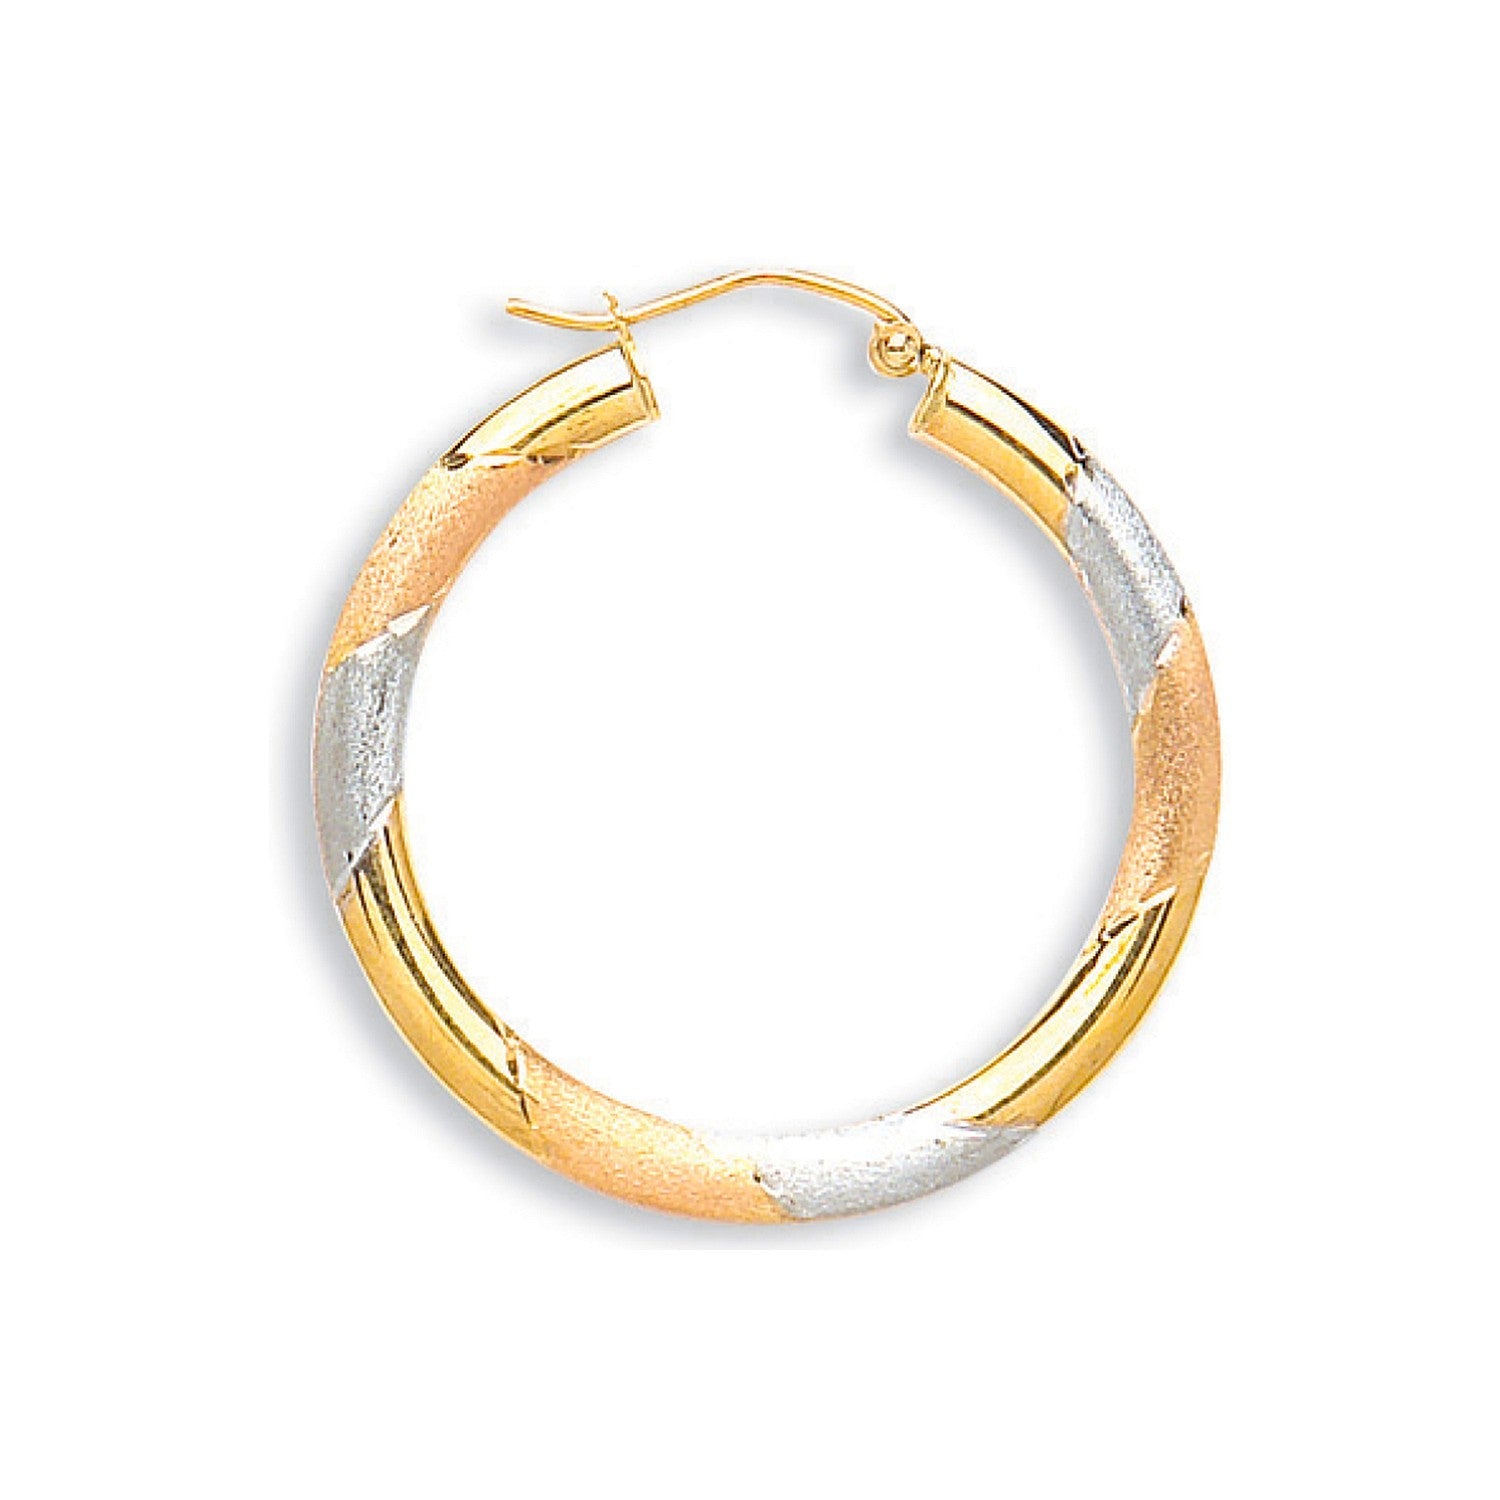 3 Colour 9ct Gold Textured Hoop Earrings - FJewellery